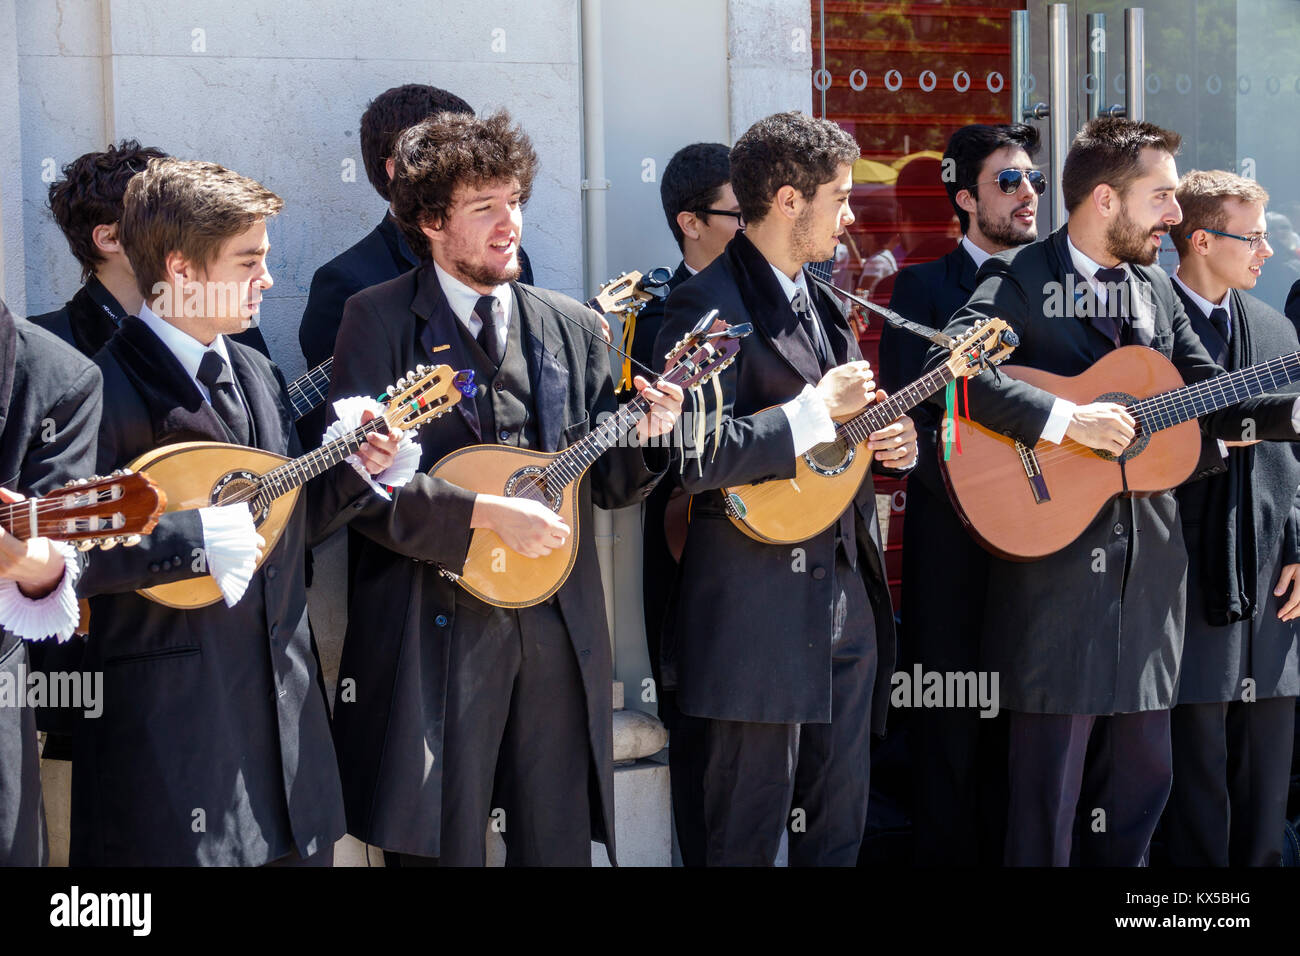 Lisbon Portugal,historic center,Rossio Square,Praca Rossio,Tuna,traditional music group,student students education pupil youth,musicians,adult adults Stock Photo